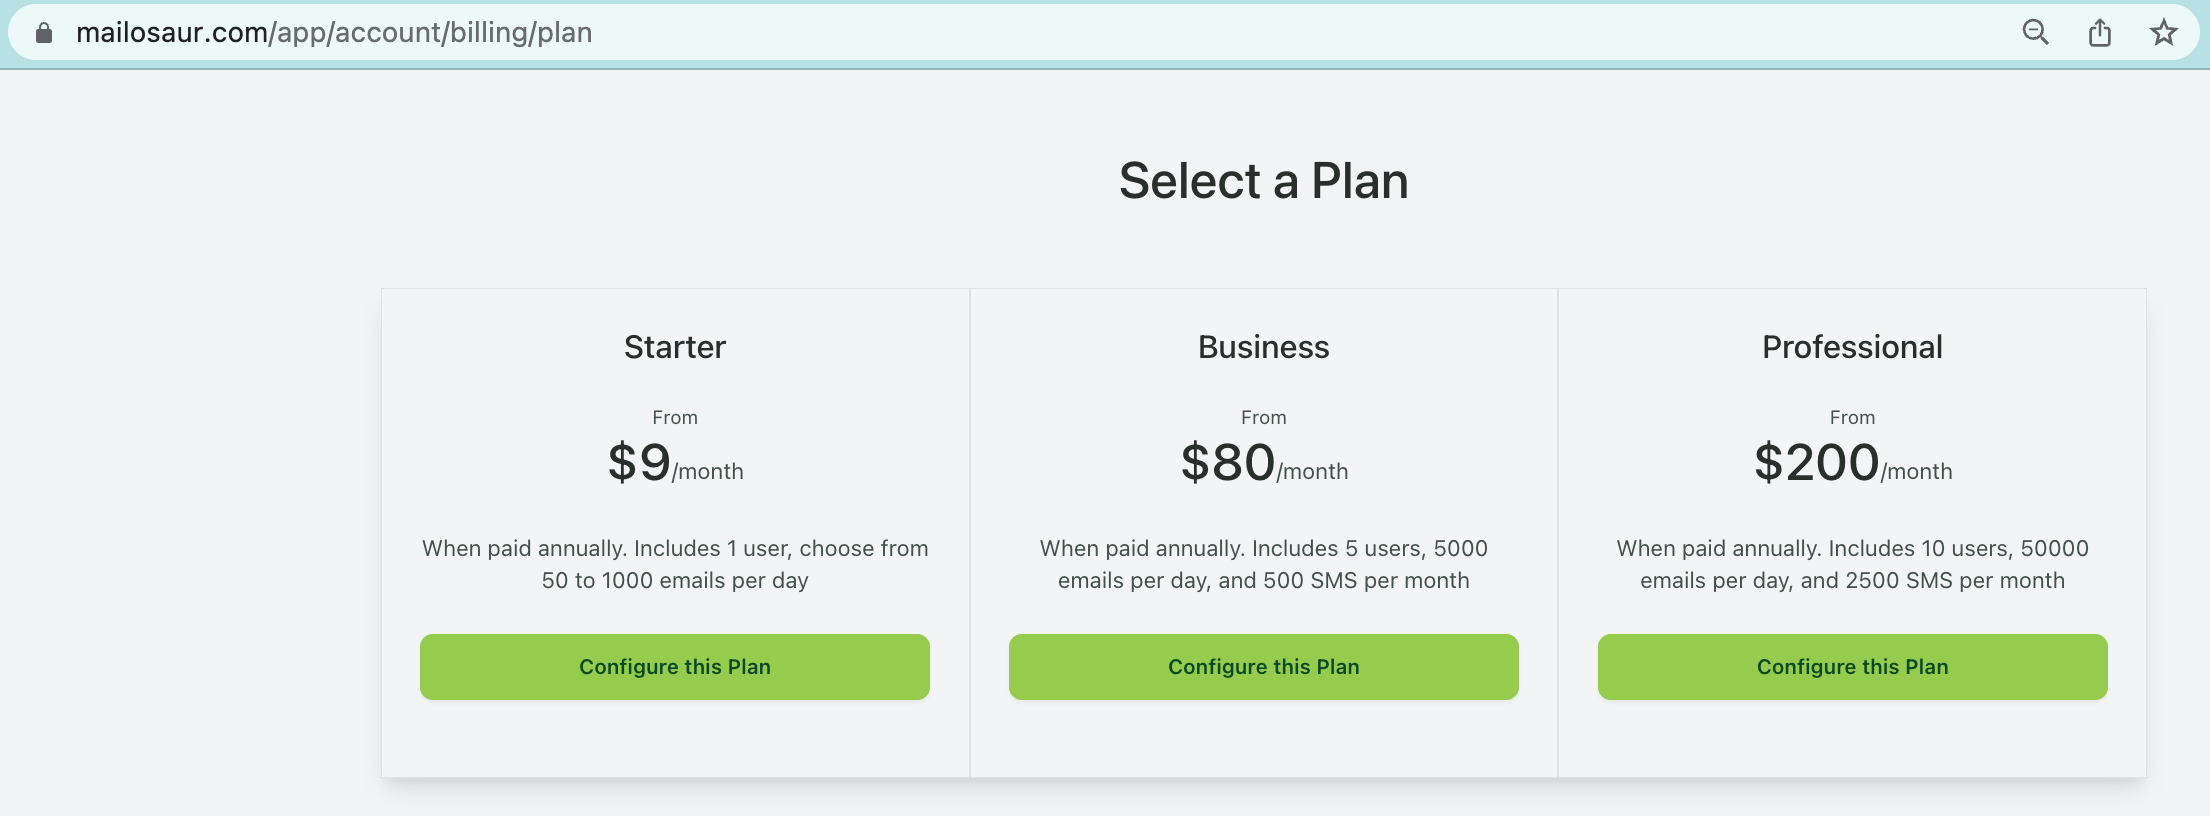 The real Business plan monthly cost